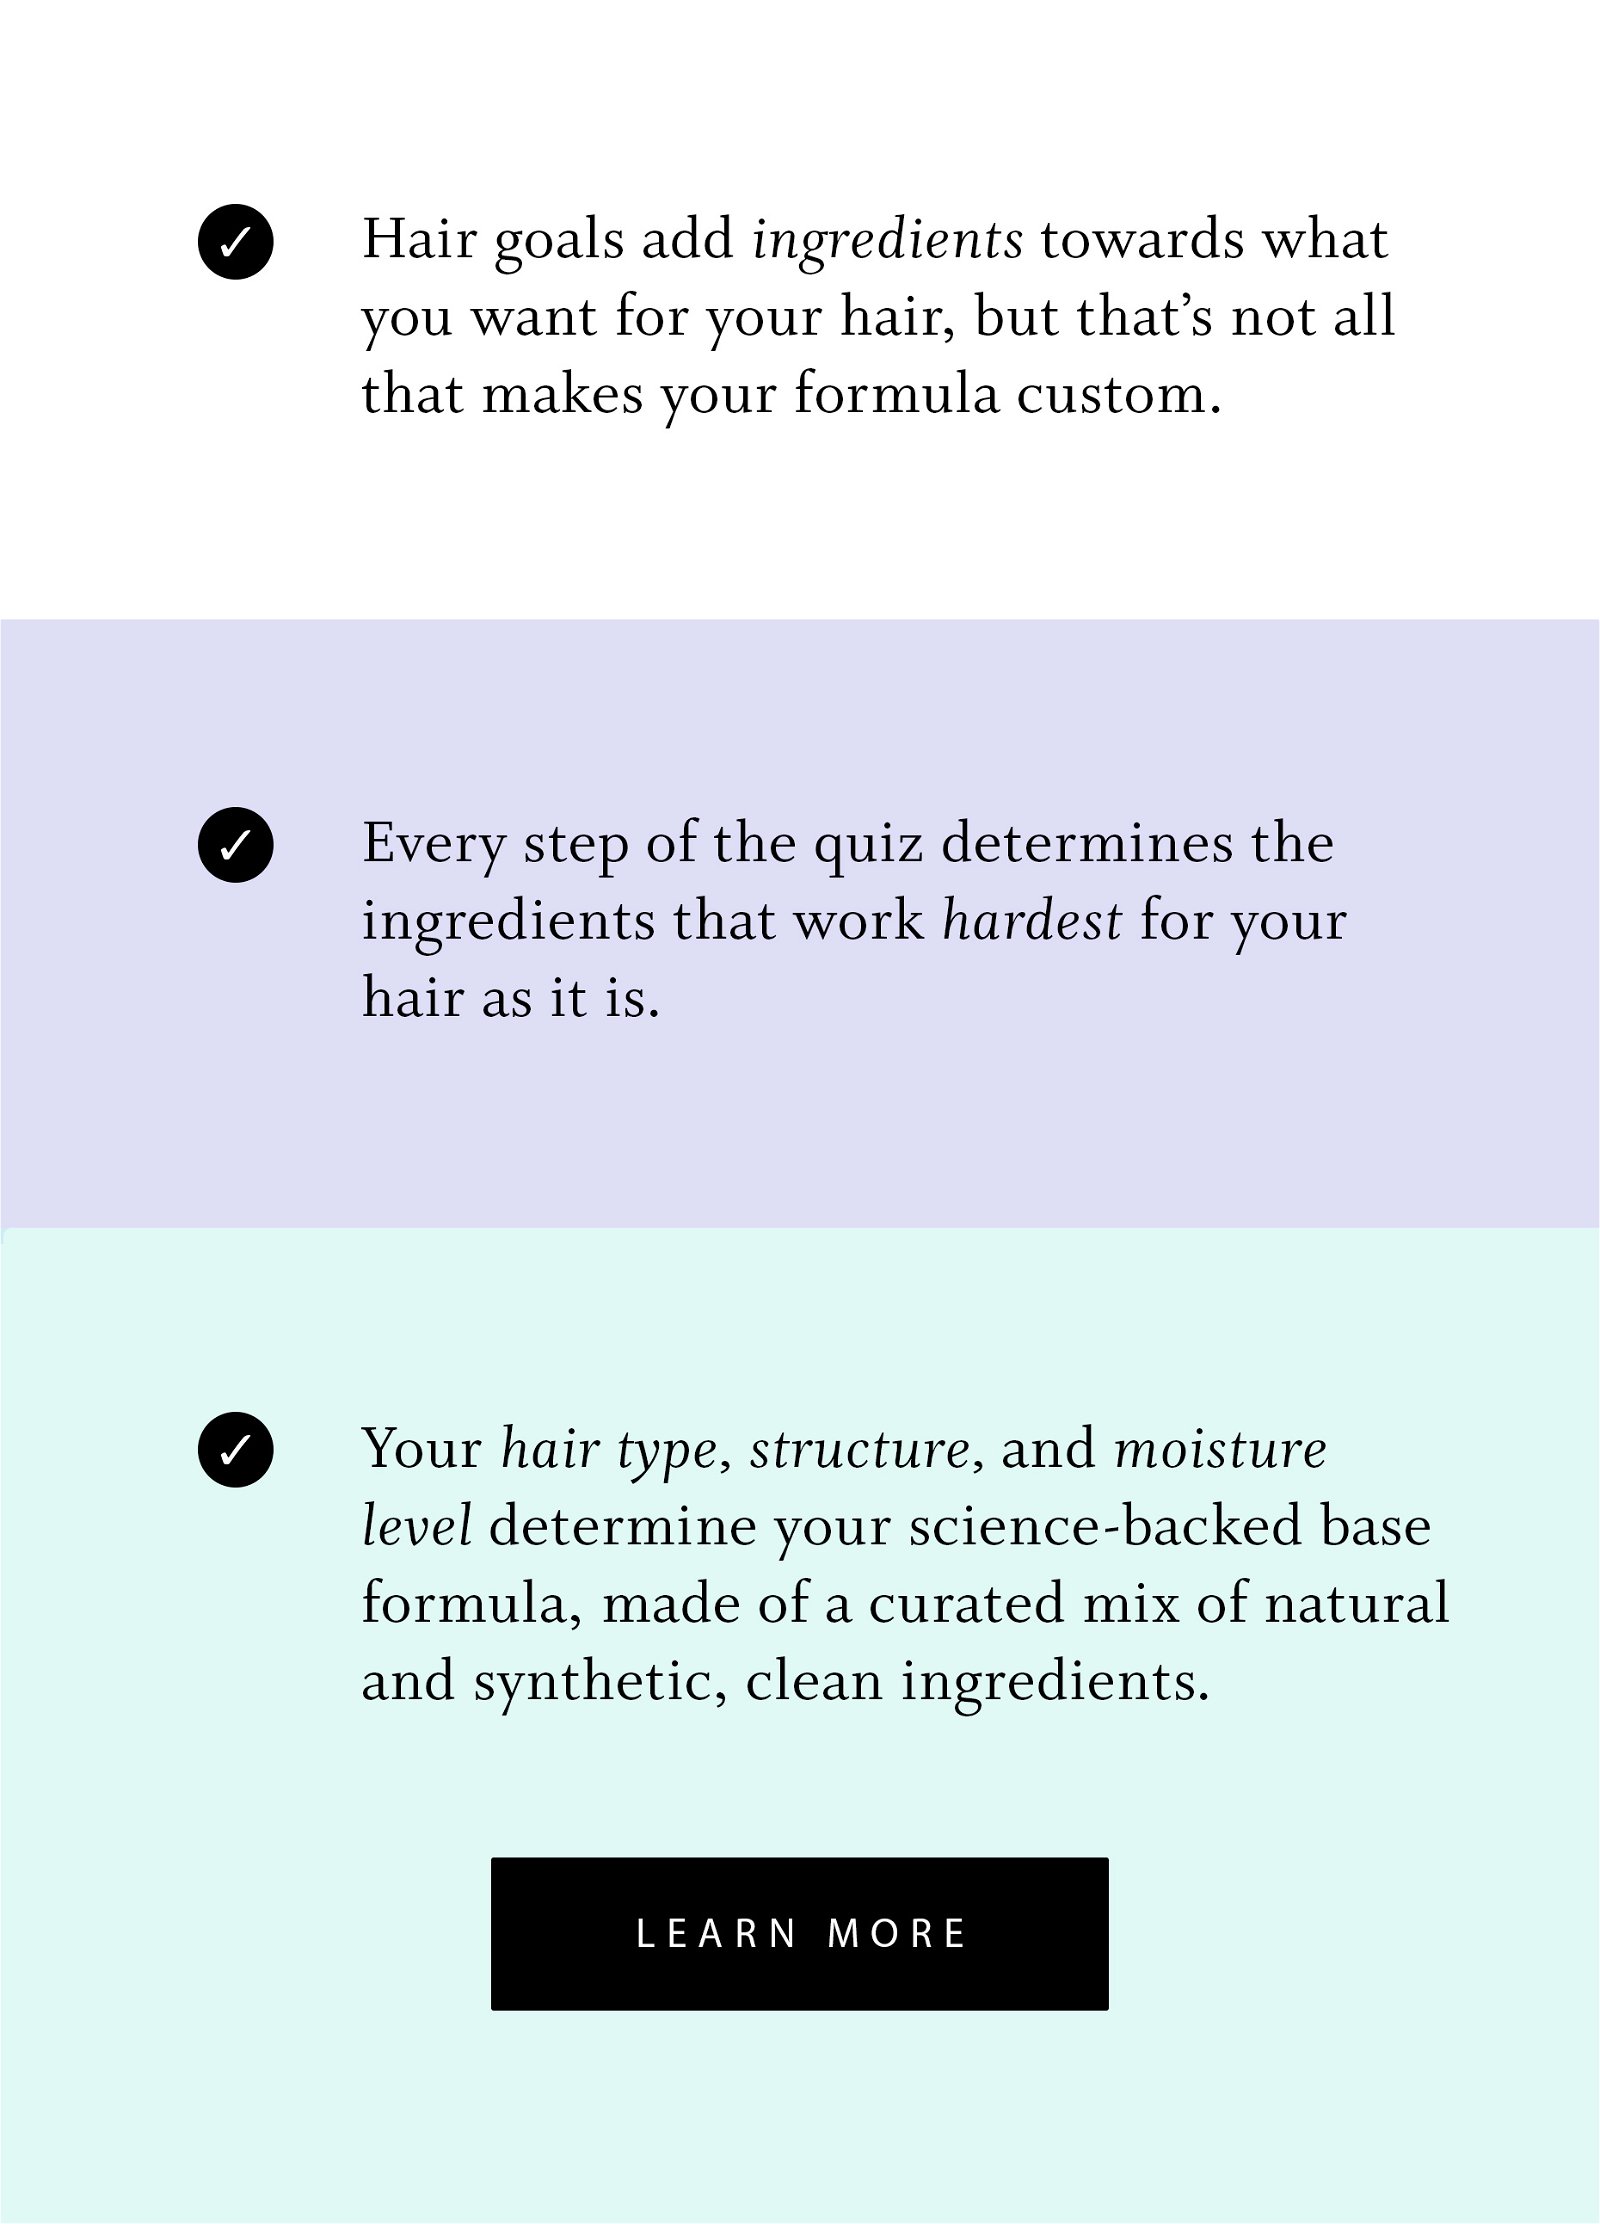 Function of Beauty: Your formula is more than hair goals | Milled